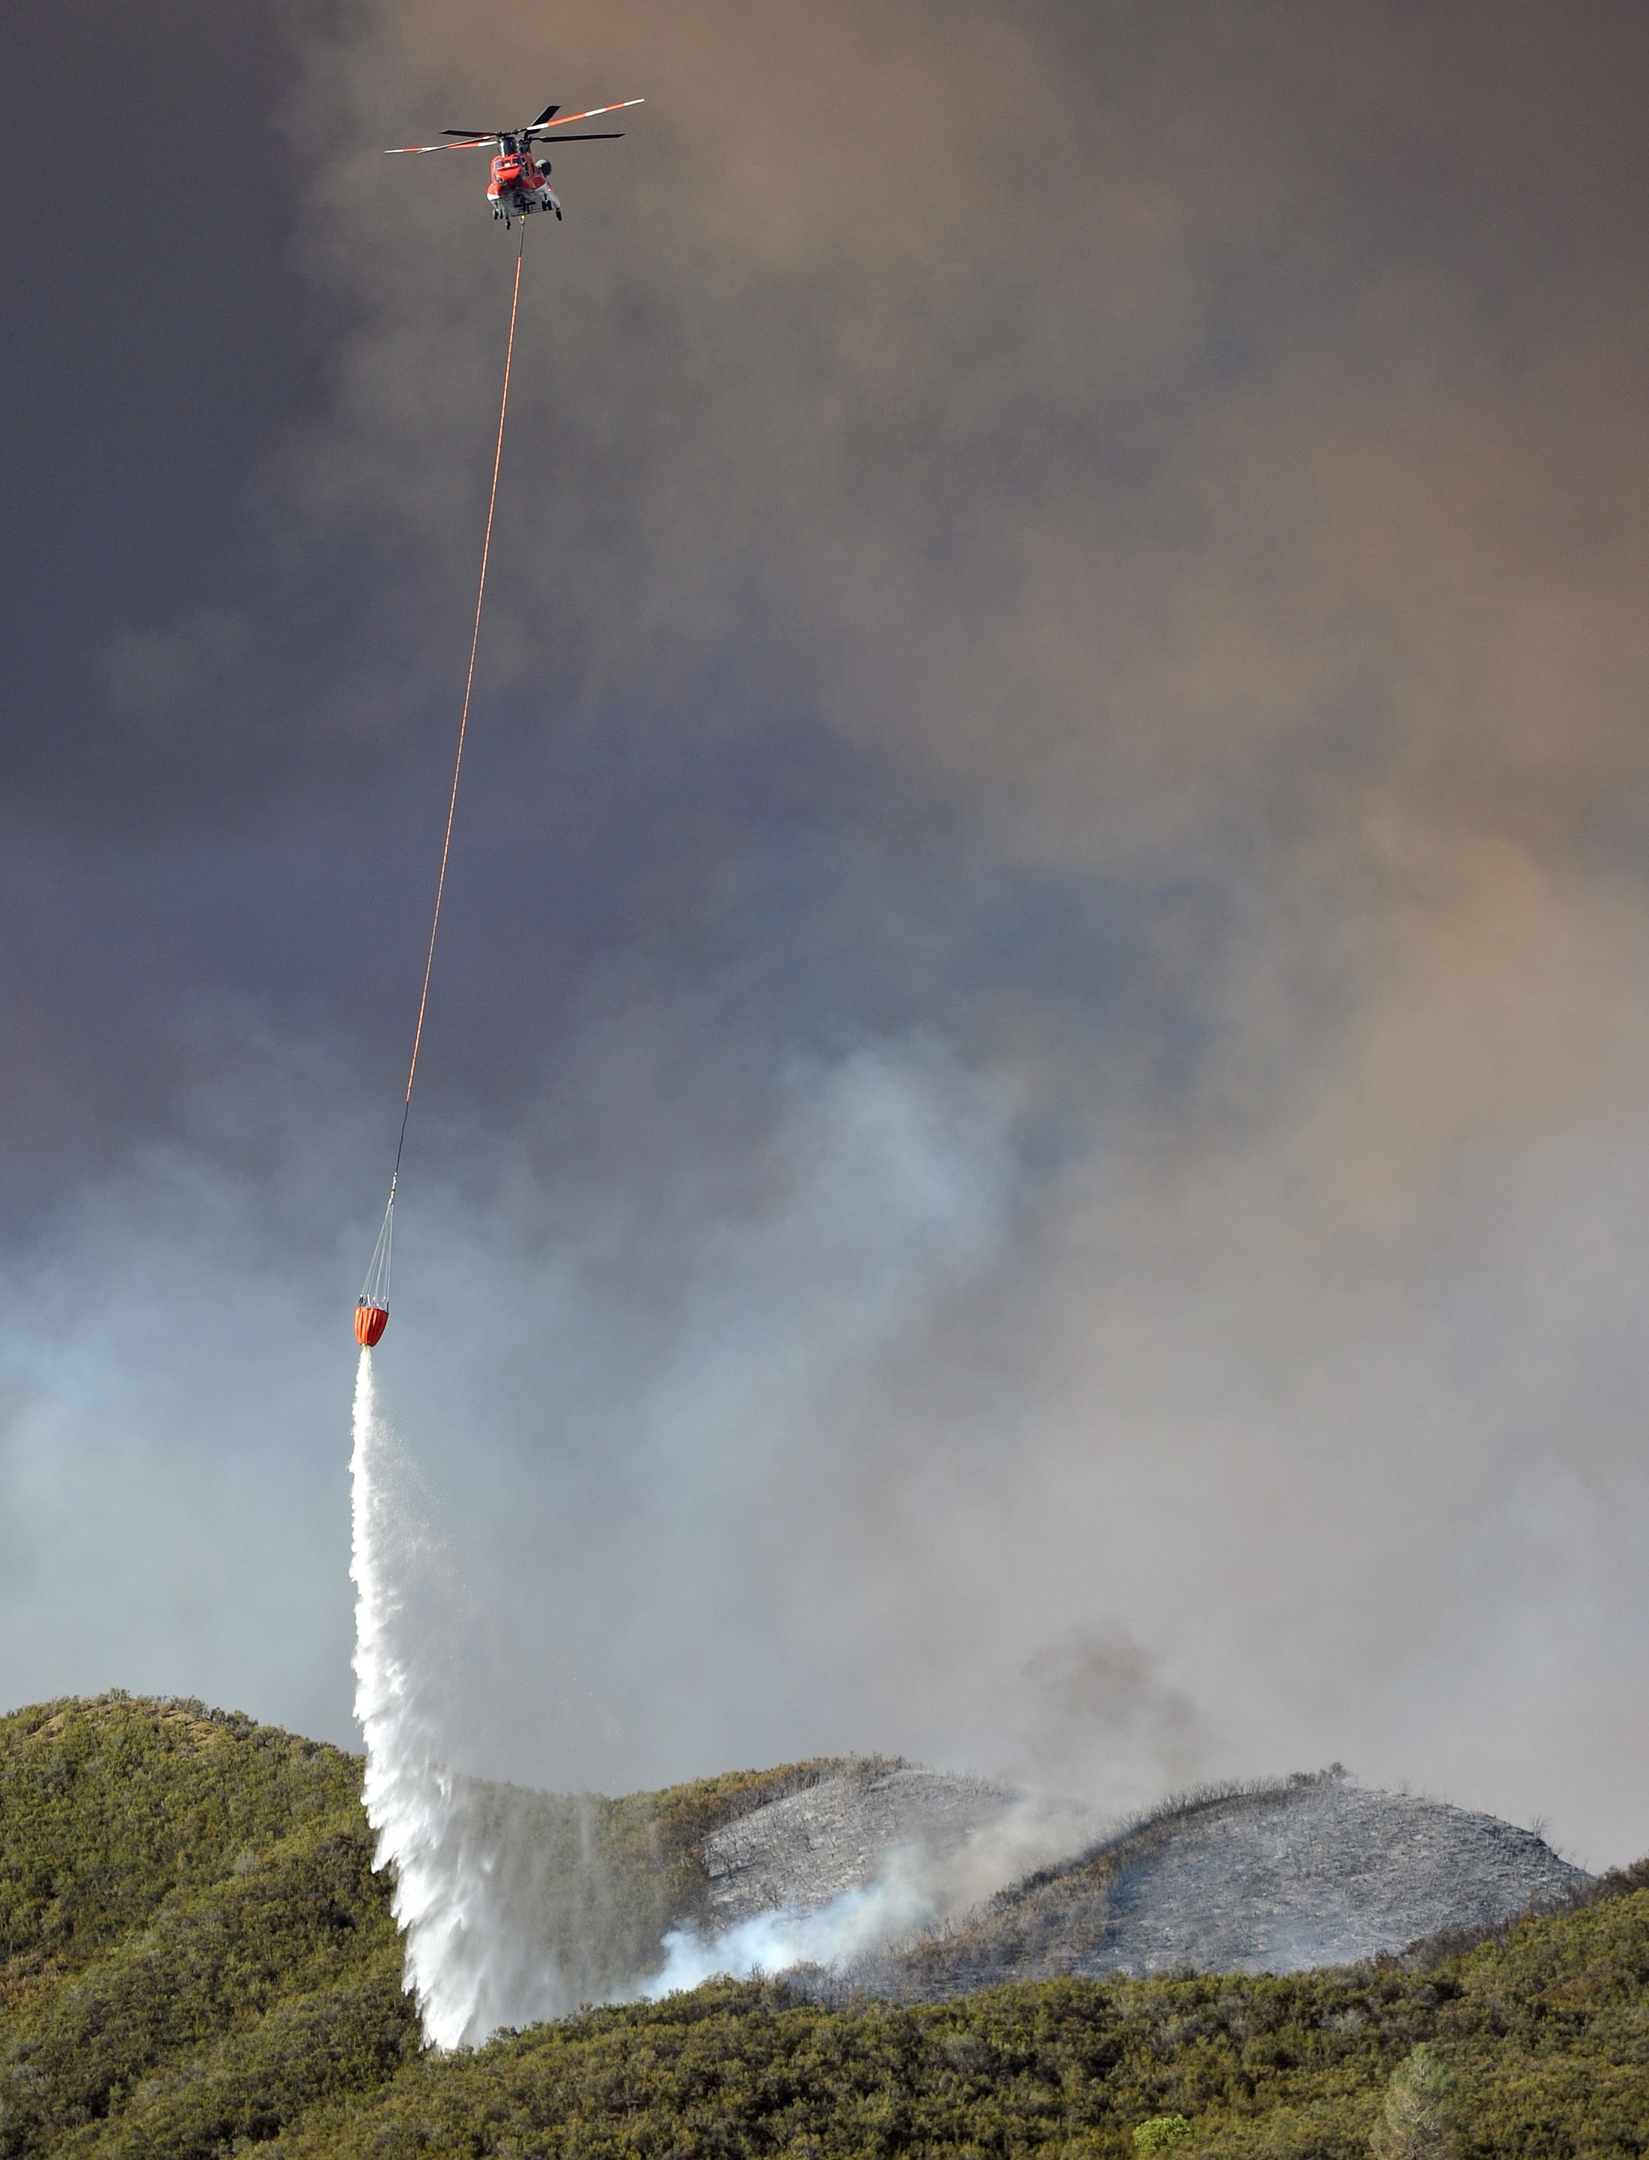 A helicopter drops water on a burning hillside while battling the Rocky Fire near Clearlake, Calif., on Monday, Aug. 3, 2015. The fire has charred more than 60,000 acres and destroyed at least 24 residences. (AP Photo/Josh Edelson)